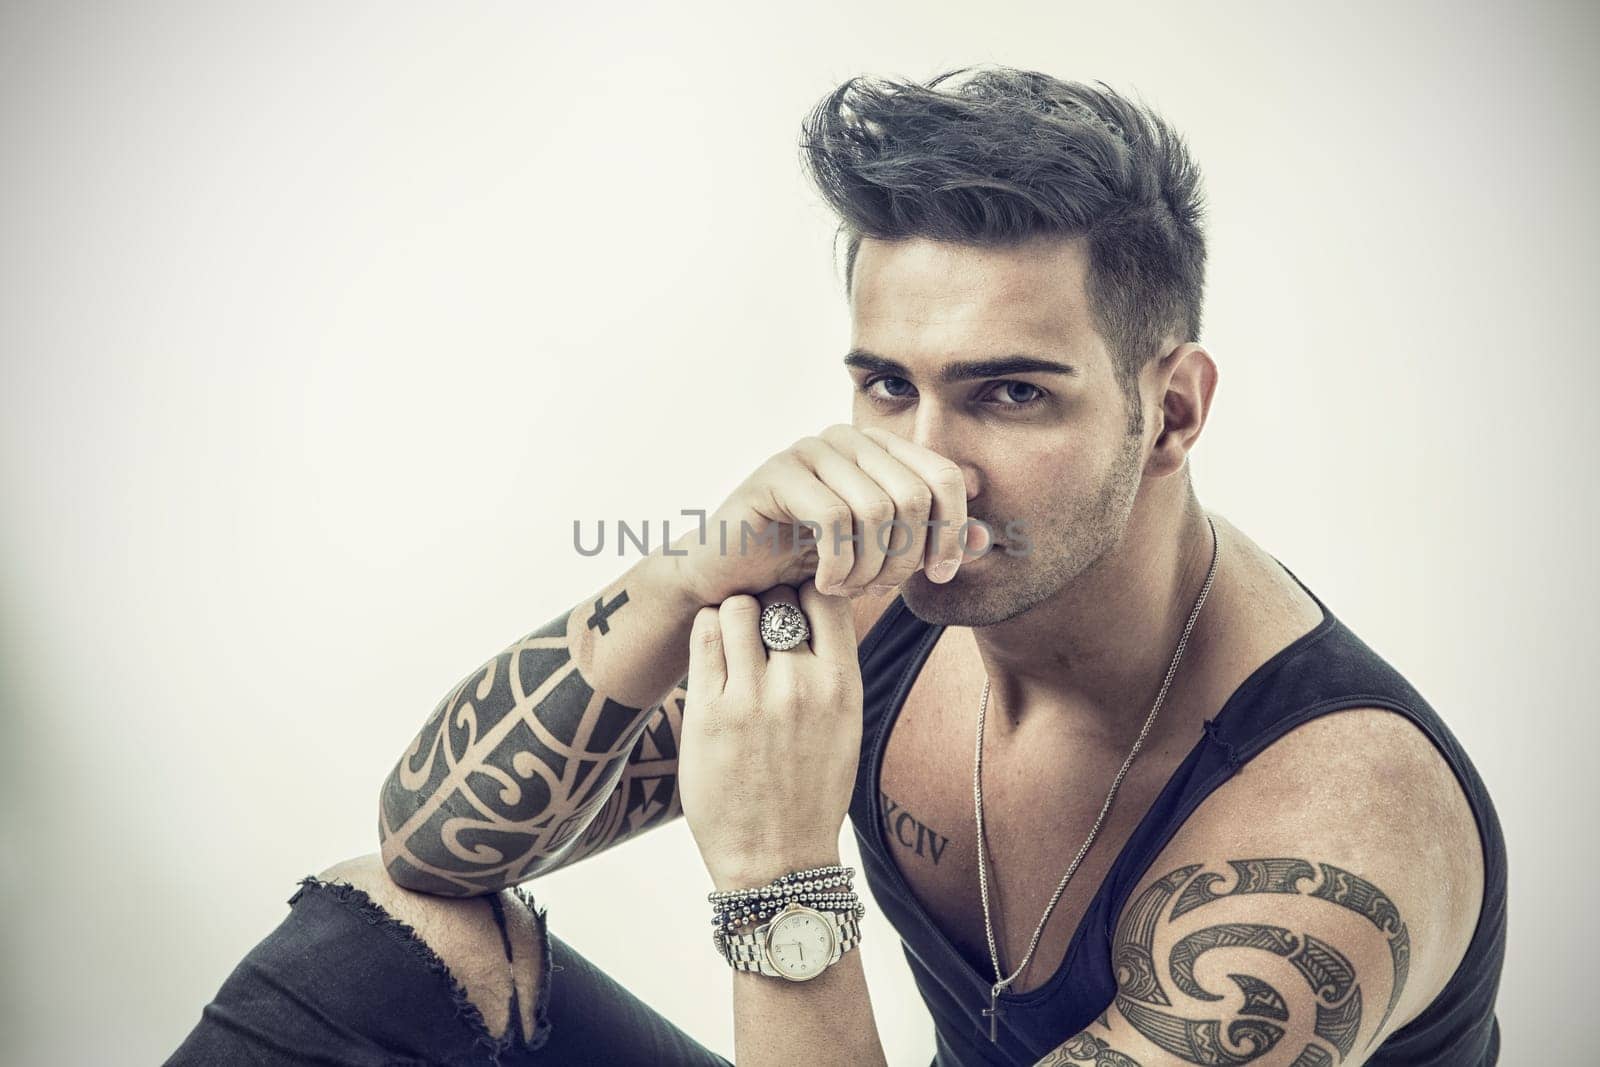 Handsome tattooed young man wearing grey t-shirt, sitting against grey background in studio shot